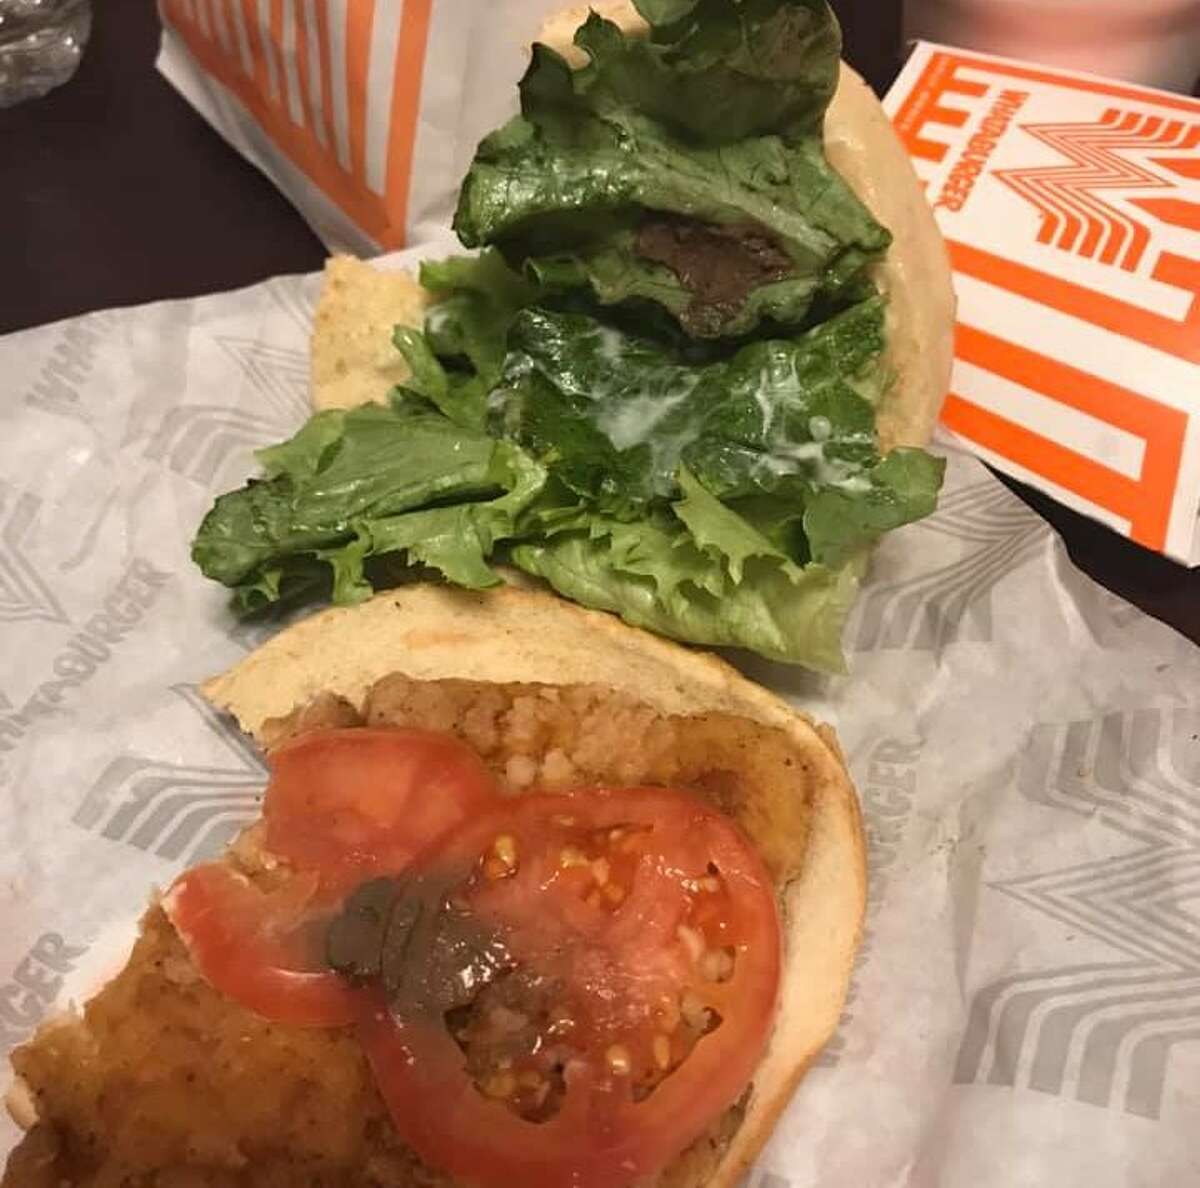 A Baytown woman is speaking out after she said she found a clump of mud in her burger from the Whataburger located at 1900 Decker Drive Jan. 27.